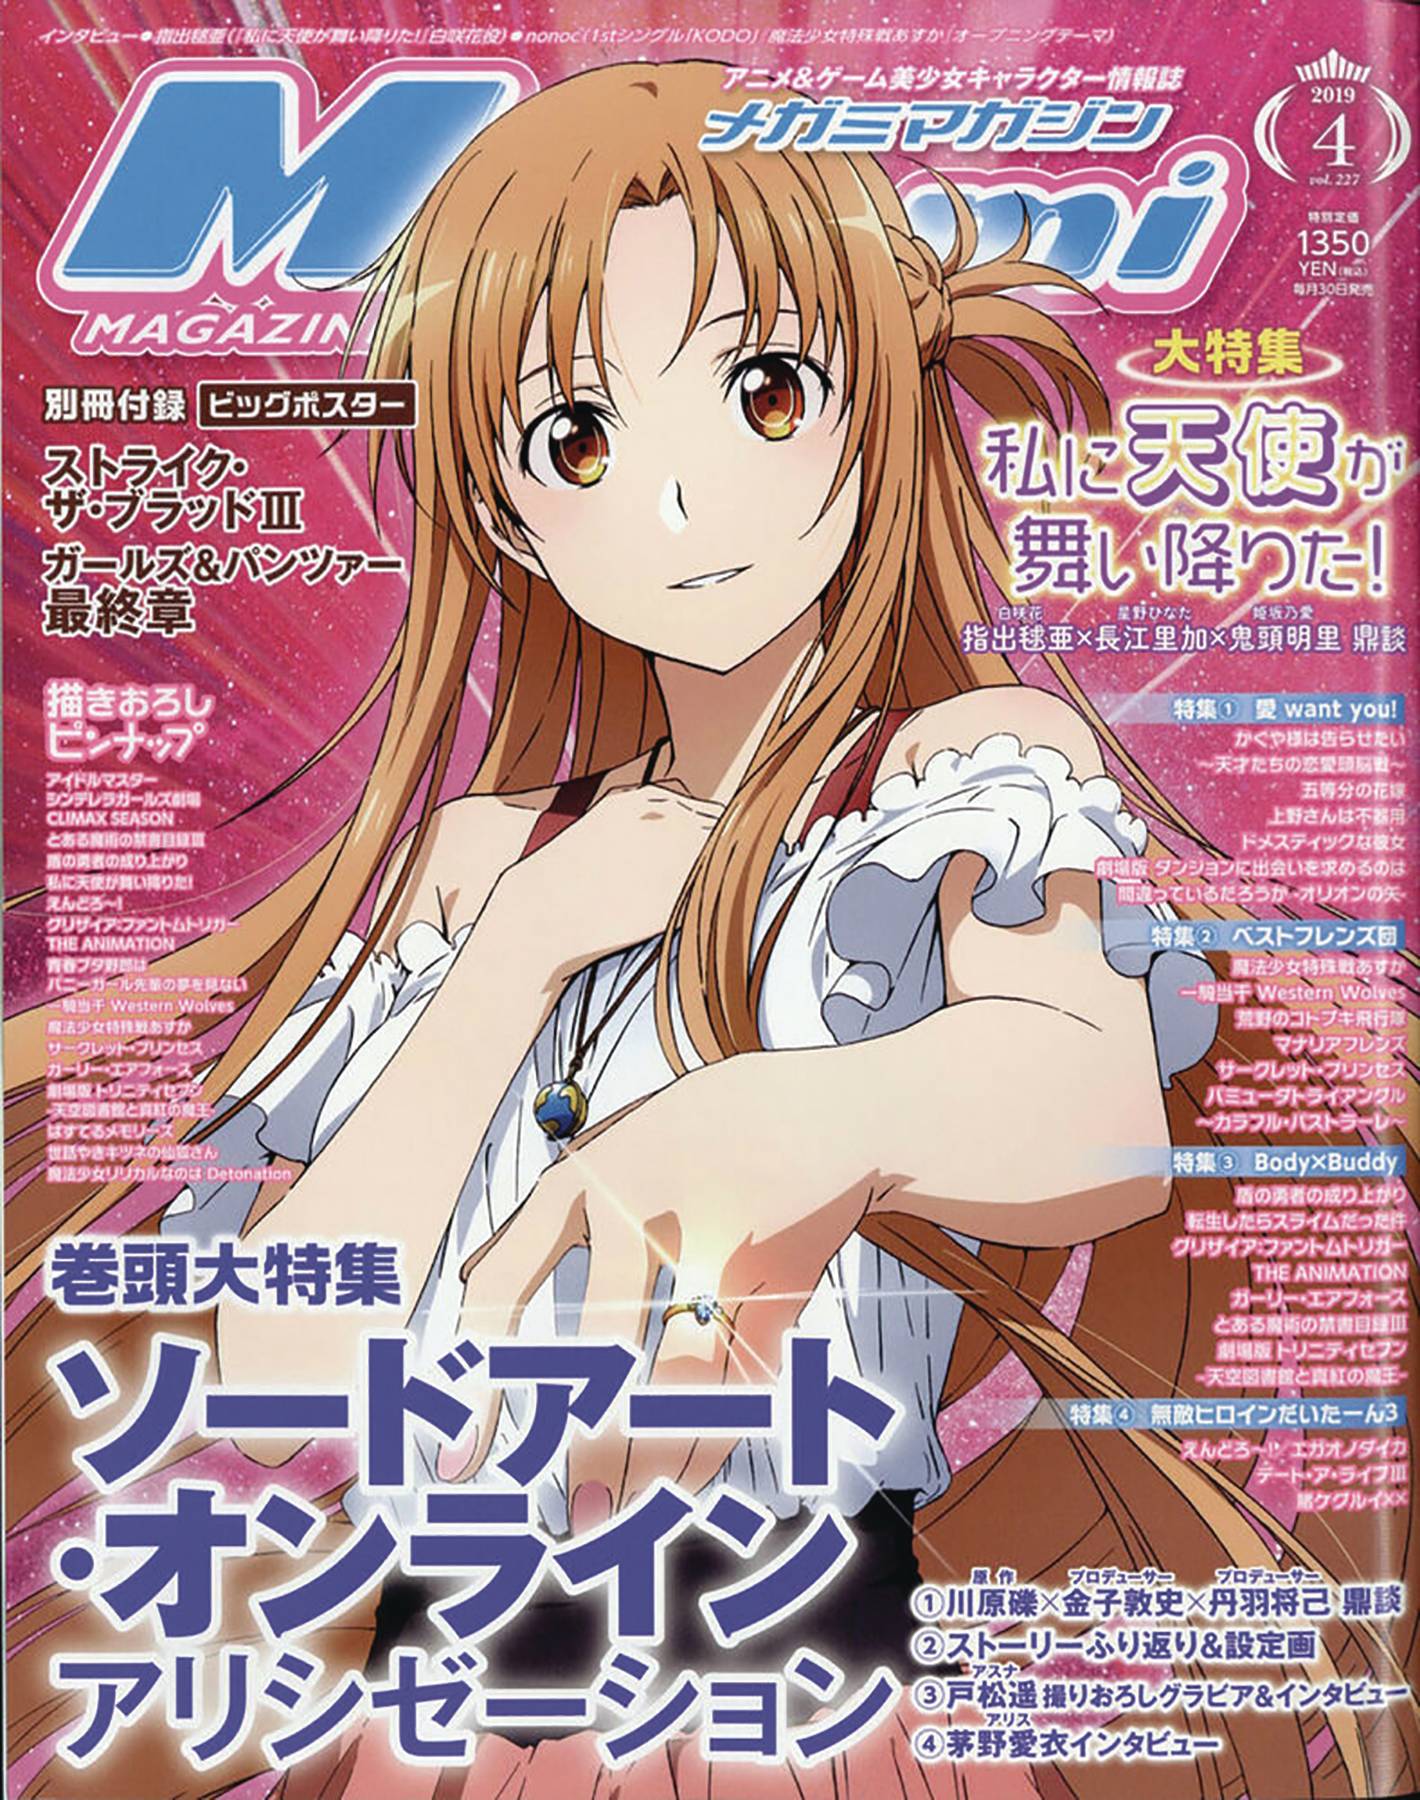 Megami August 19 Published By Tohan Corporation Forbiddenplanet Com Uk And Worldwide Cult Entertainment Megastore